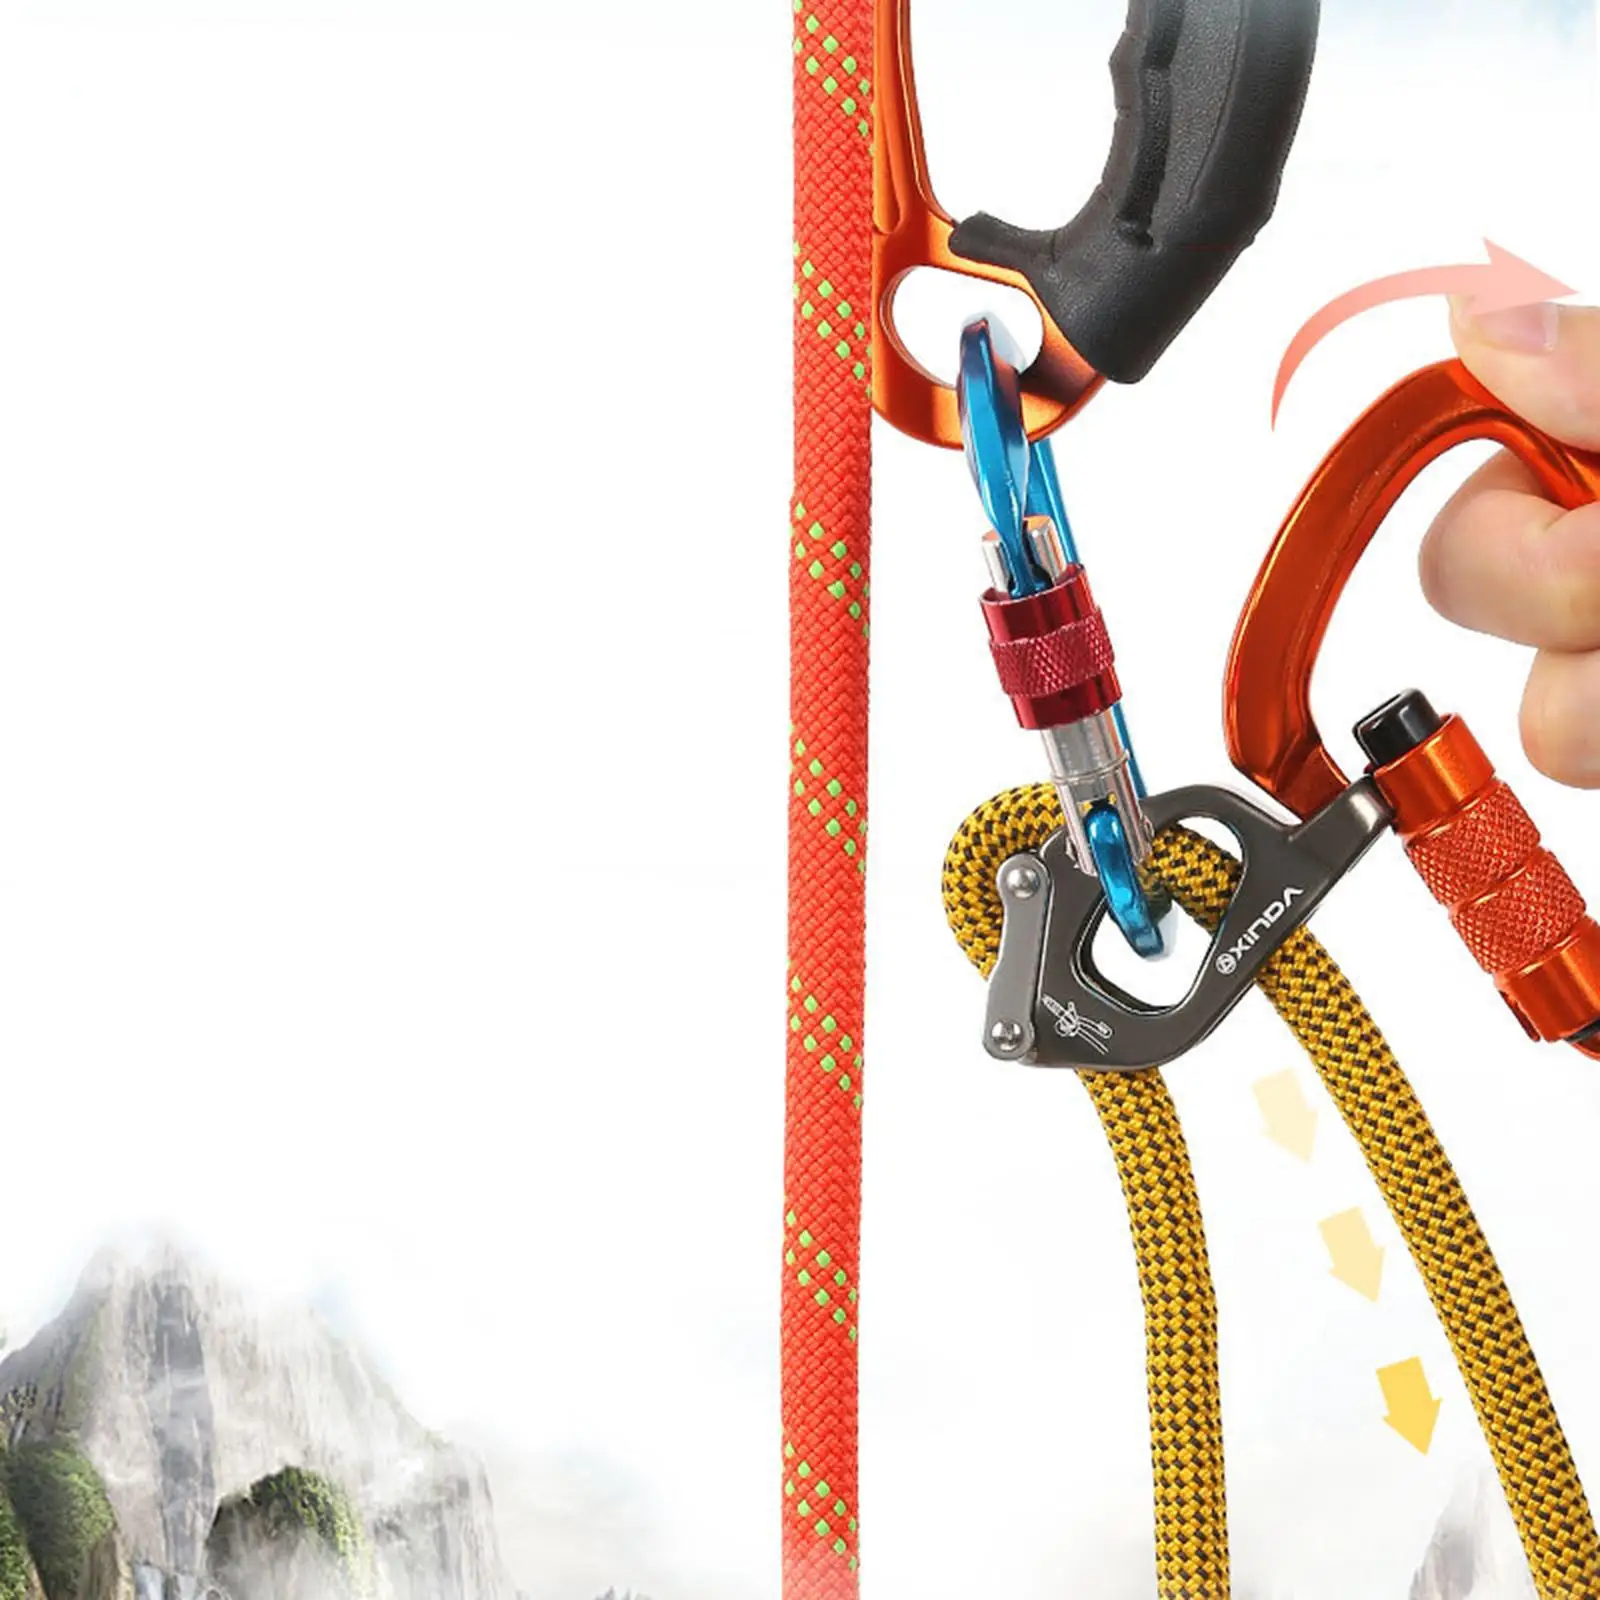 Professional Positioning Lanyard Harness Buffered Strap Climbing Descending Construction